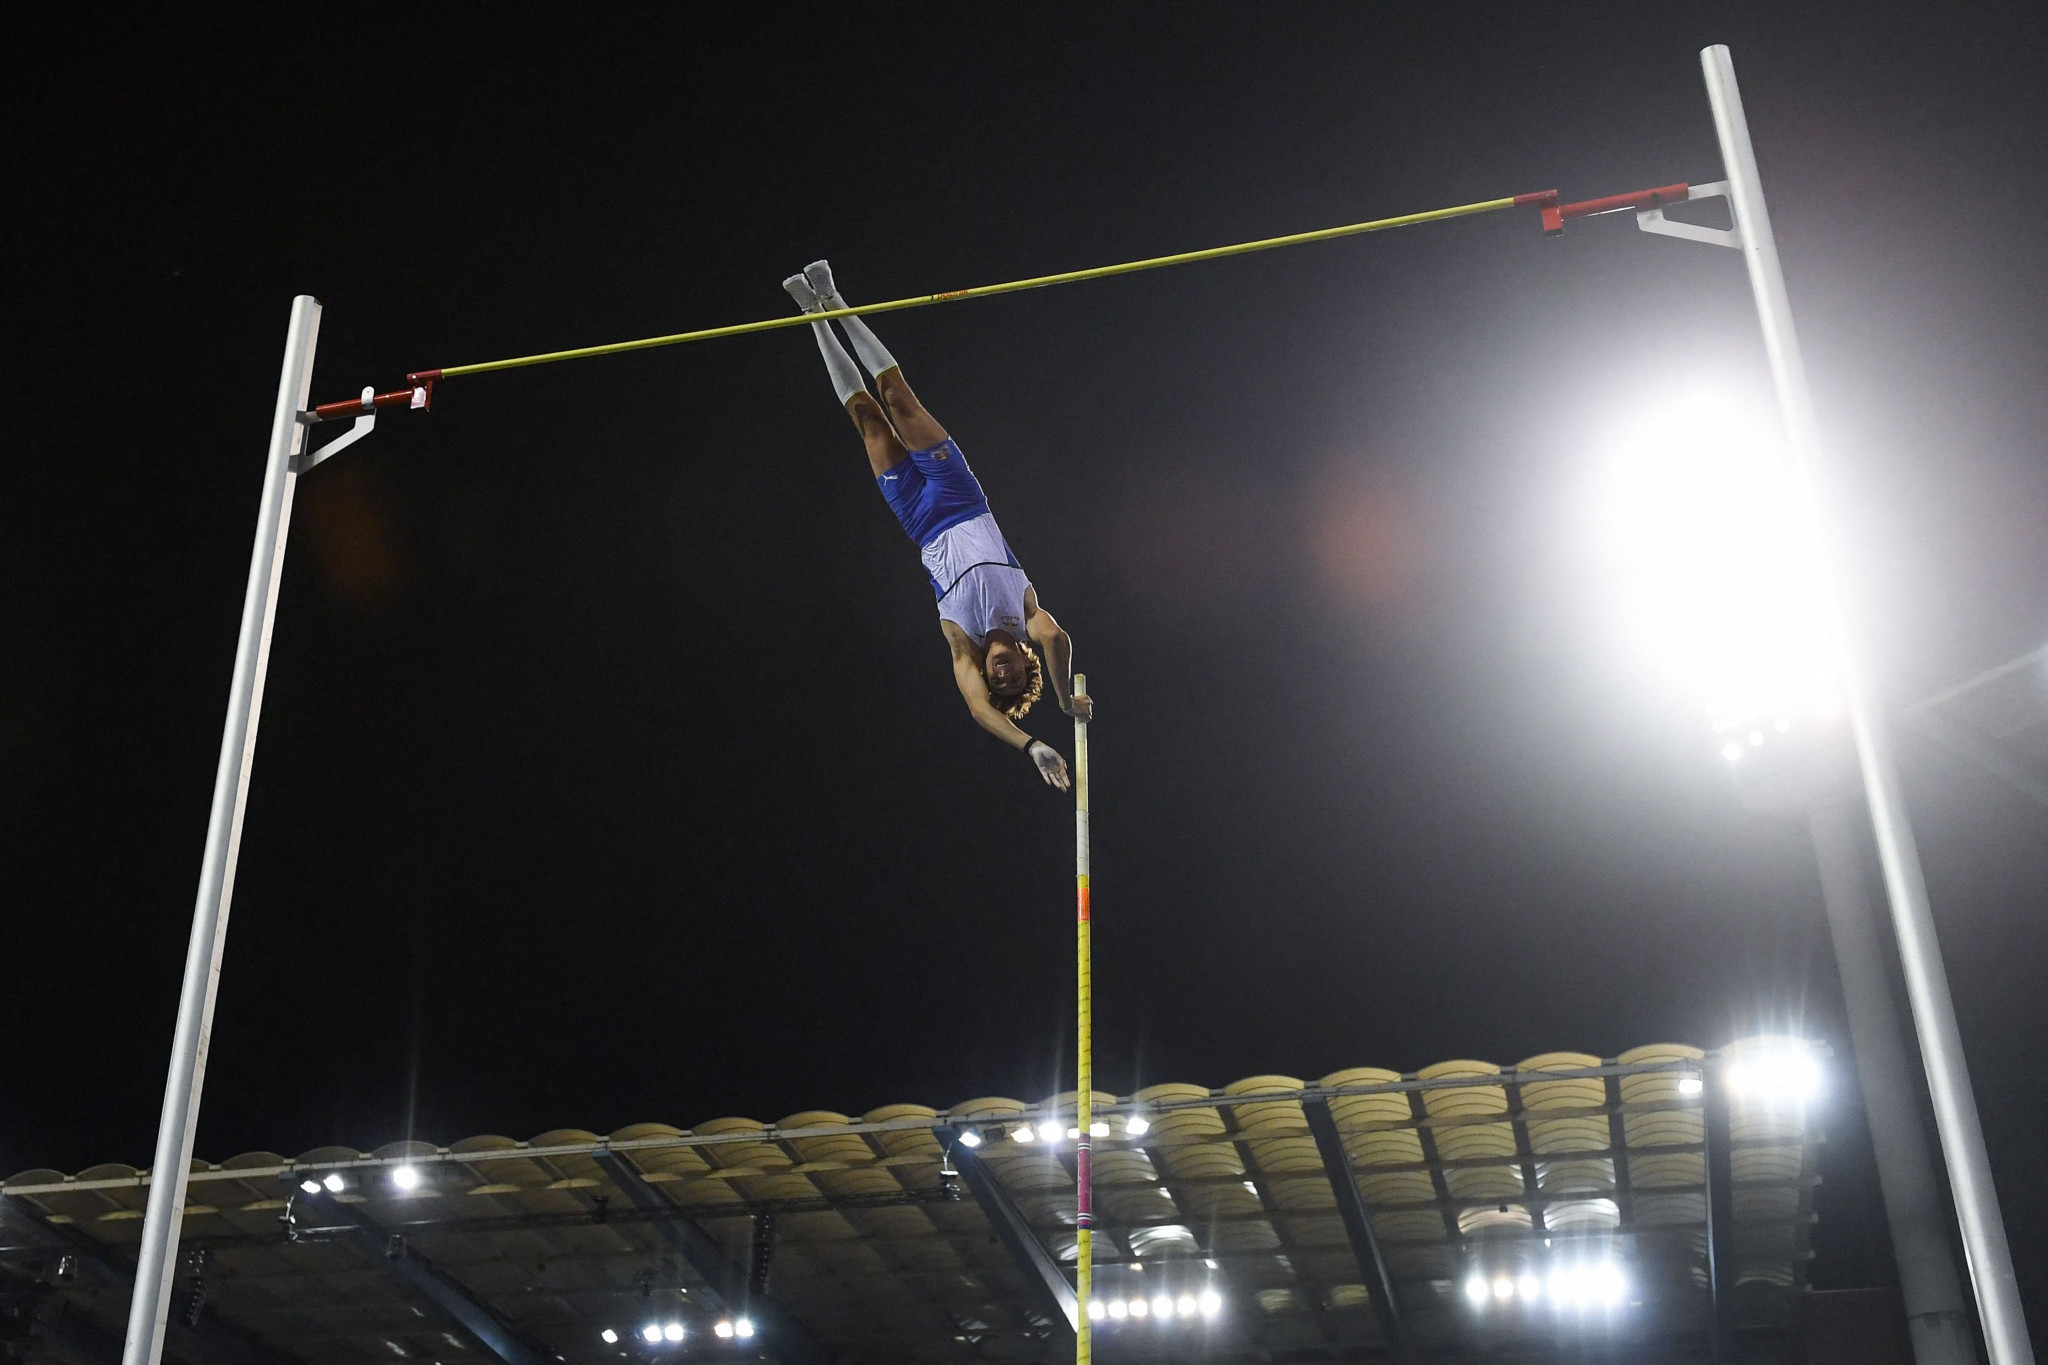 Mondo Duplantis took the pole vault victory, but was unable to break his own world record ©Getty Images